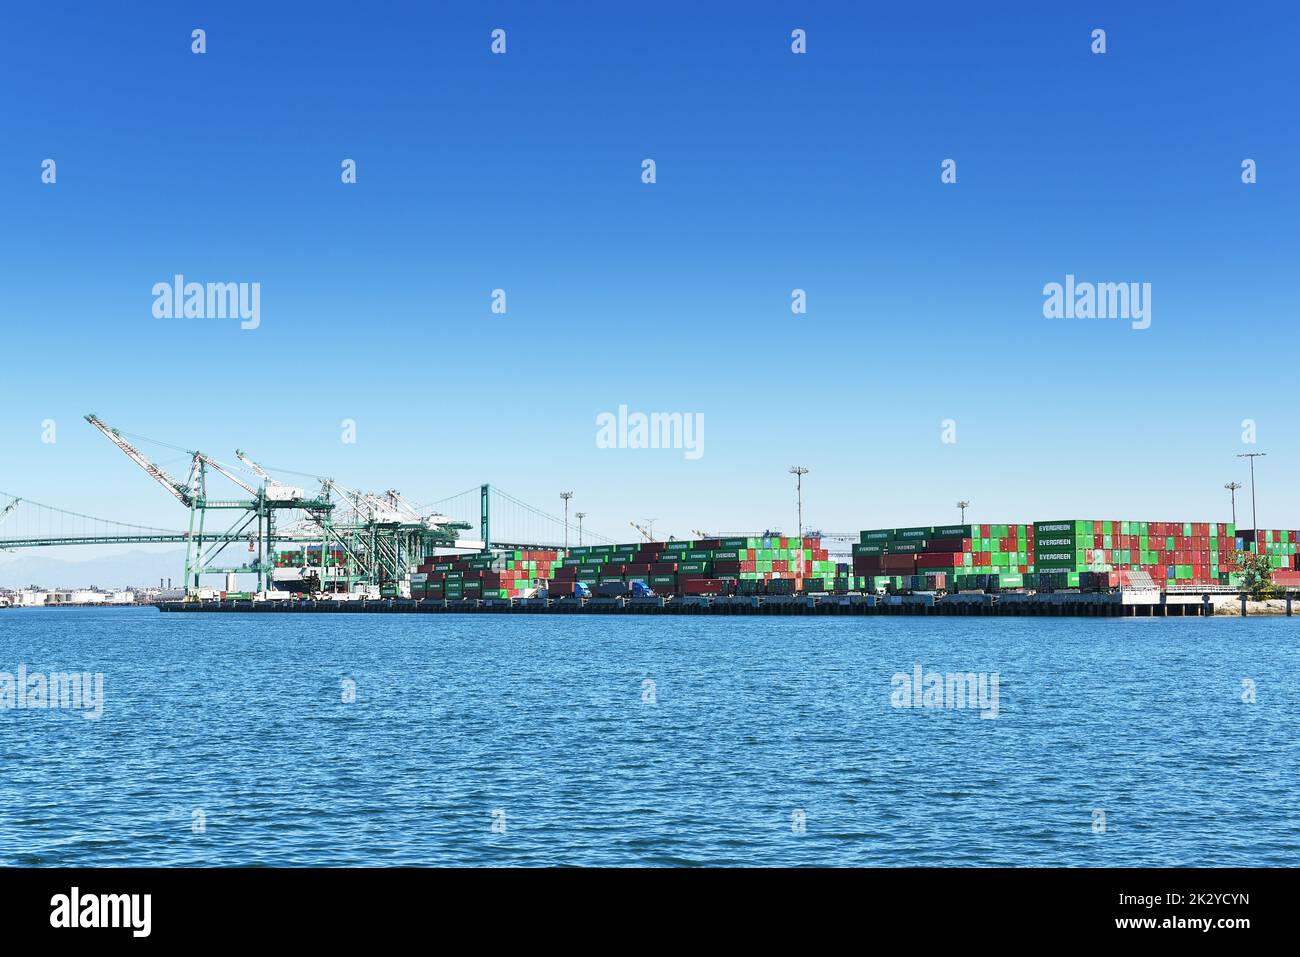 SAN PEDRO, CALIFORNIA - 21 SEP 2022: Shipping Containers on the dock in the Main Channel of the Port of Los Angeles. Stock Photo